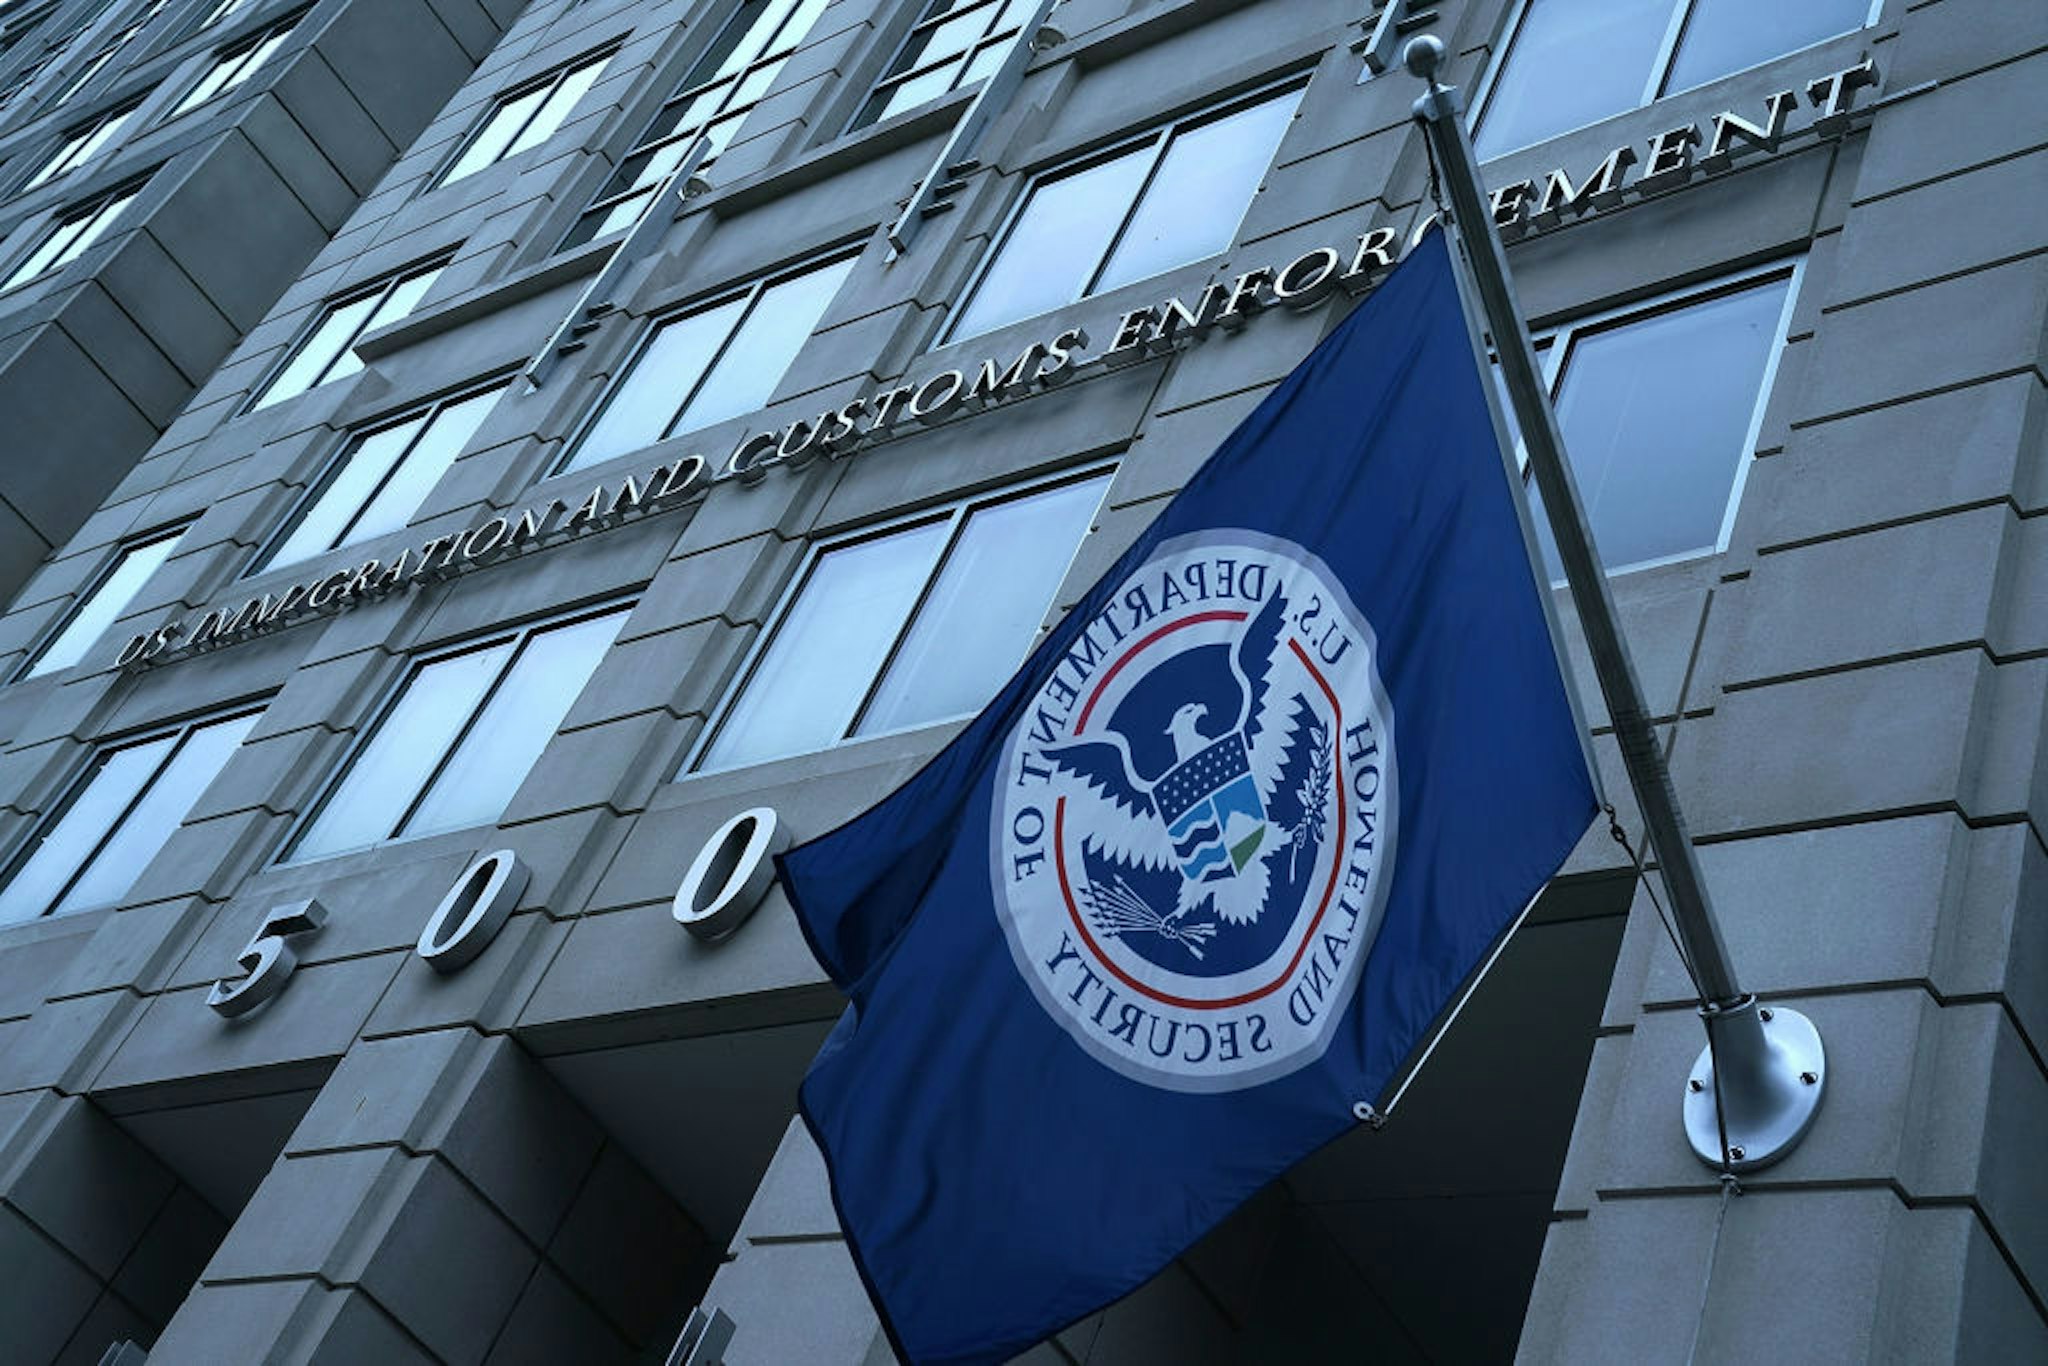 WASHINGTON, DC - JULY 06: An exterior view of U.S. Immigration and Customs Enforcement (ICE) agency headquarters is seen July 6, 2018 in Washington, DC. U.S. Vice President Mike Pence placed a visit to the agency and received a briefing on "ICE's overall mission on enforcement and removal operations, countering illicit trade, and human smuggling."